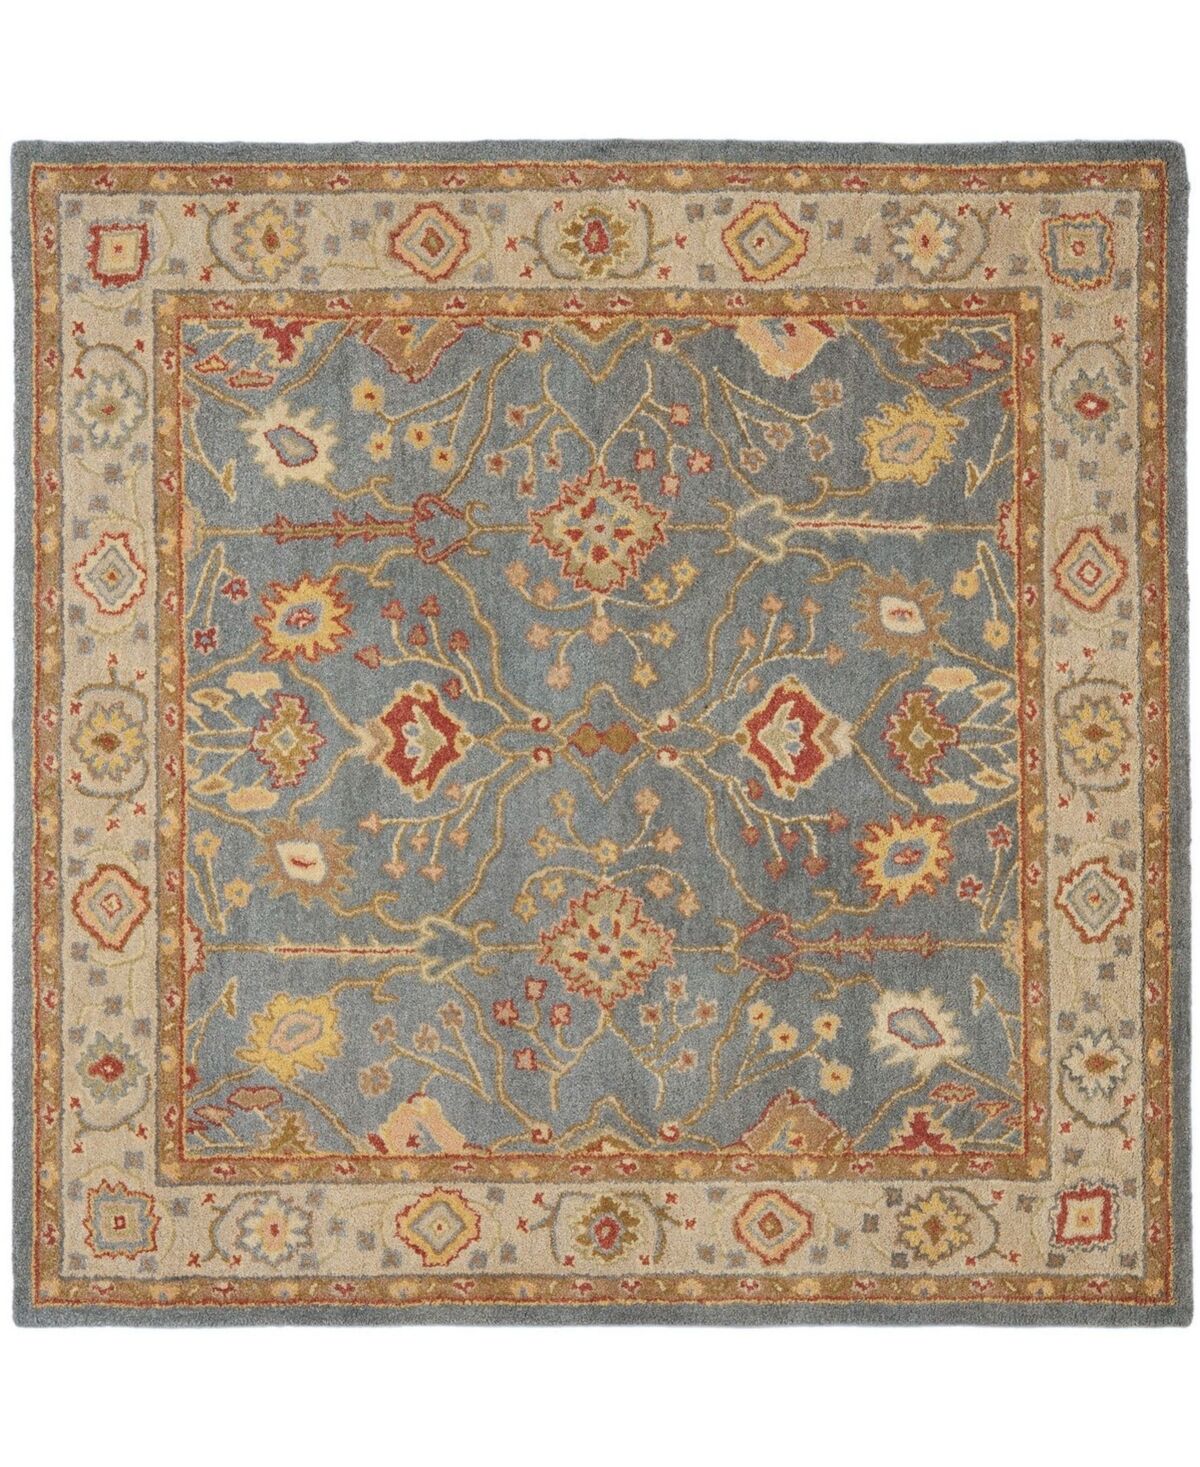 Safavieh Antiquity At314 Blue and Ivory 8' x 8' Square Area Rug - Blue